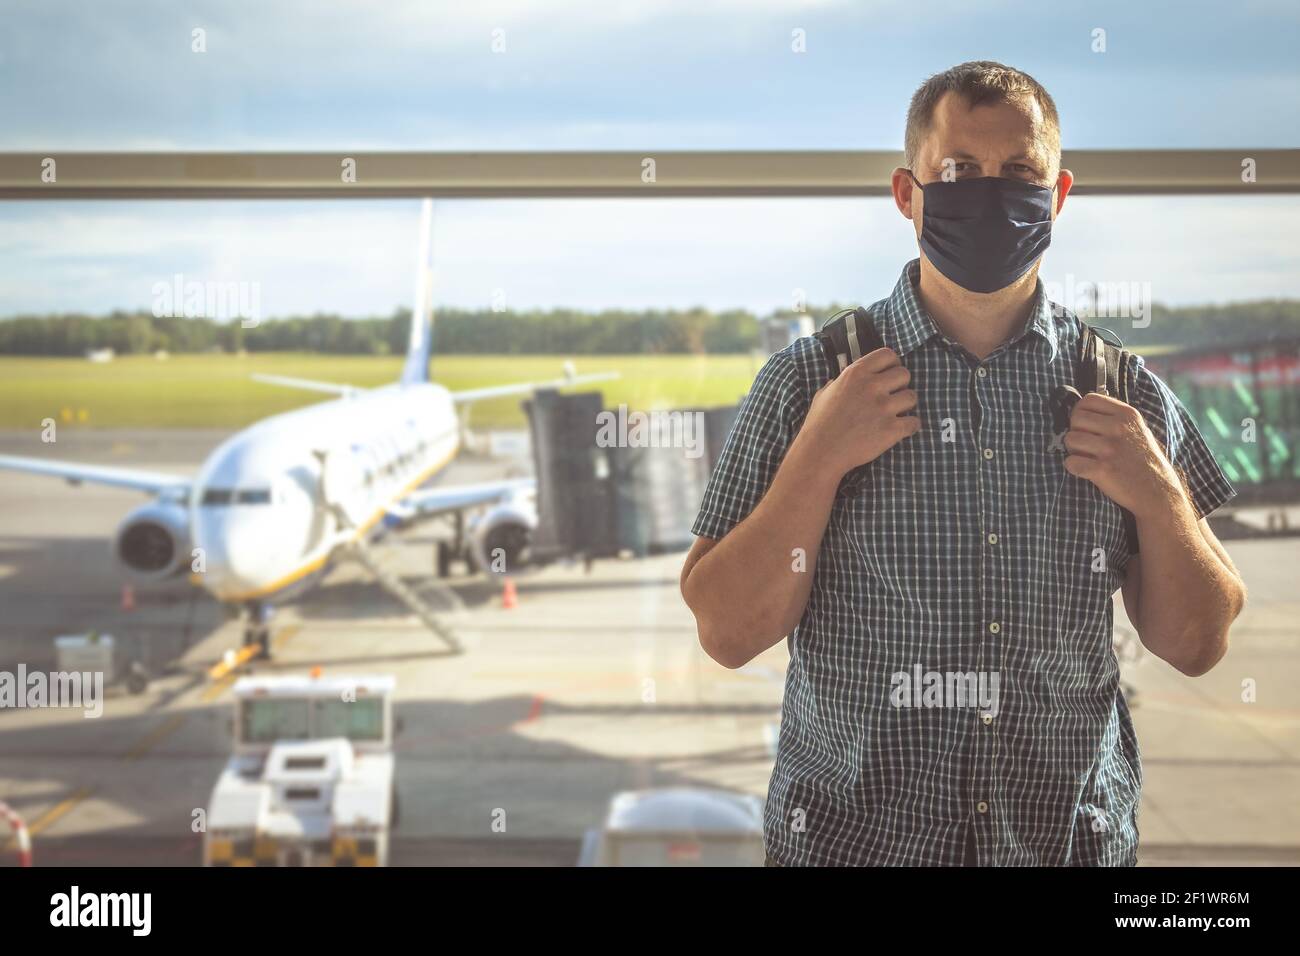 Man with a backpack waiting for departure in Covid19 time Stock Photo